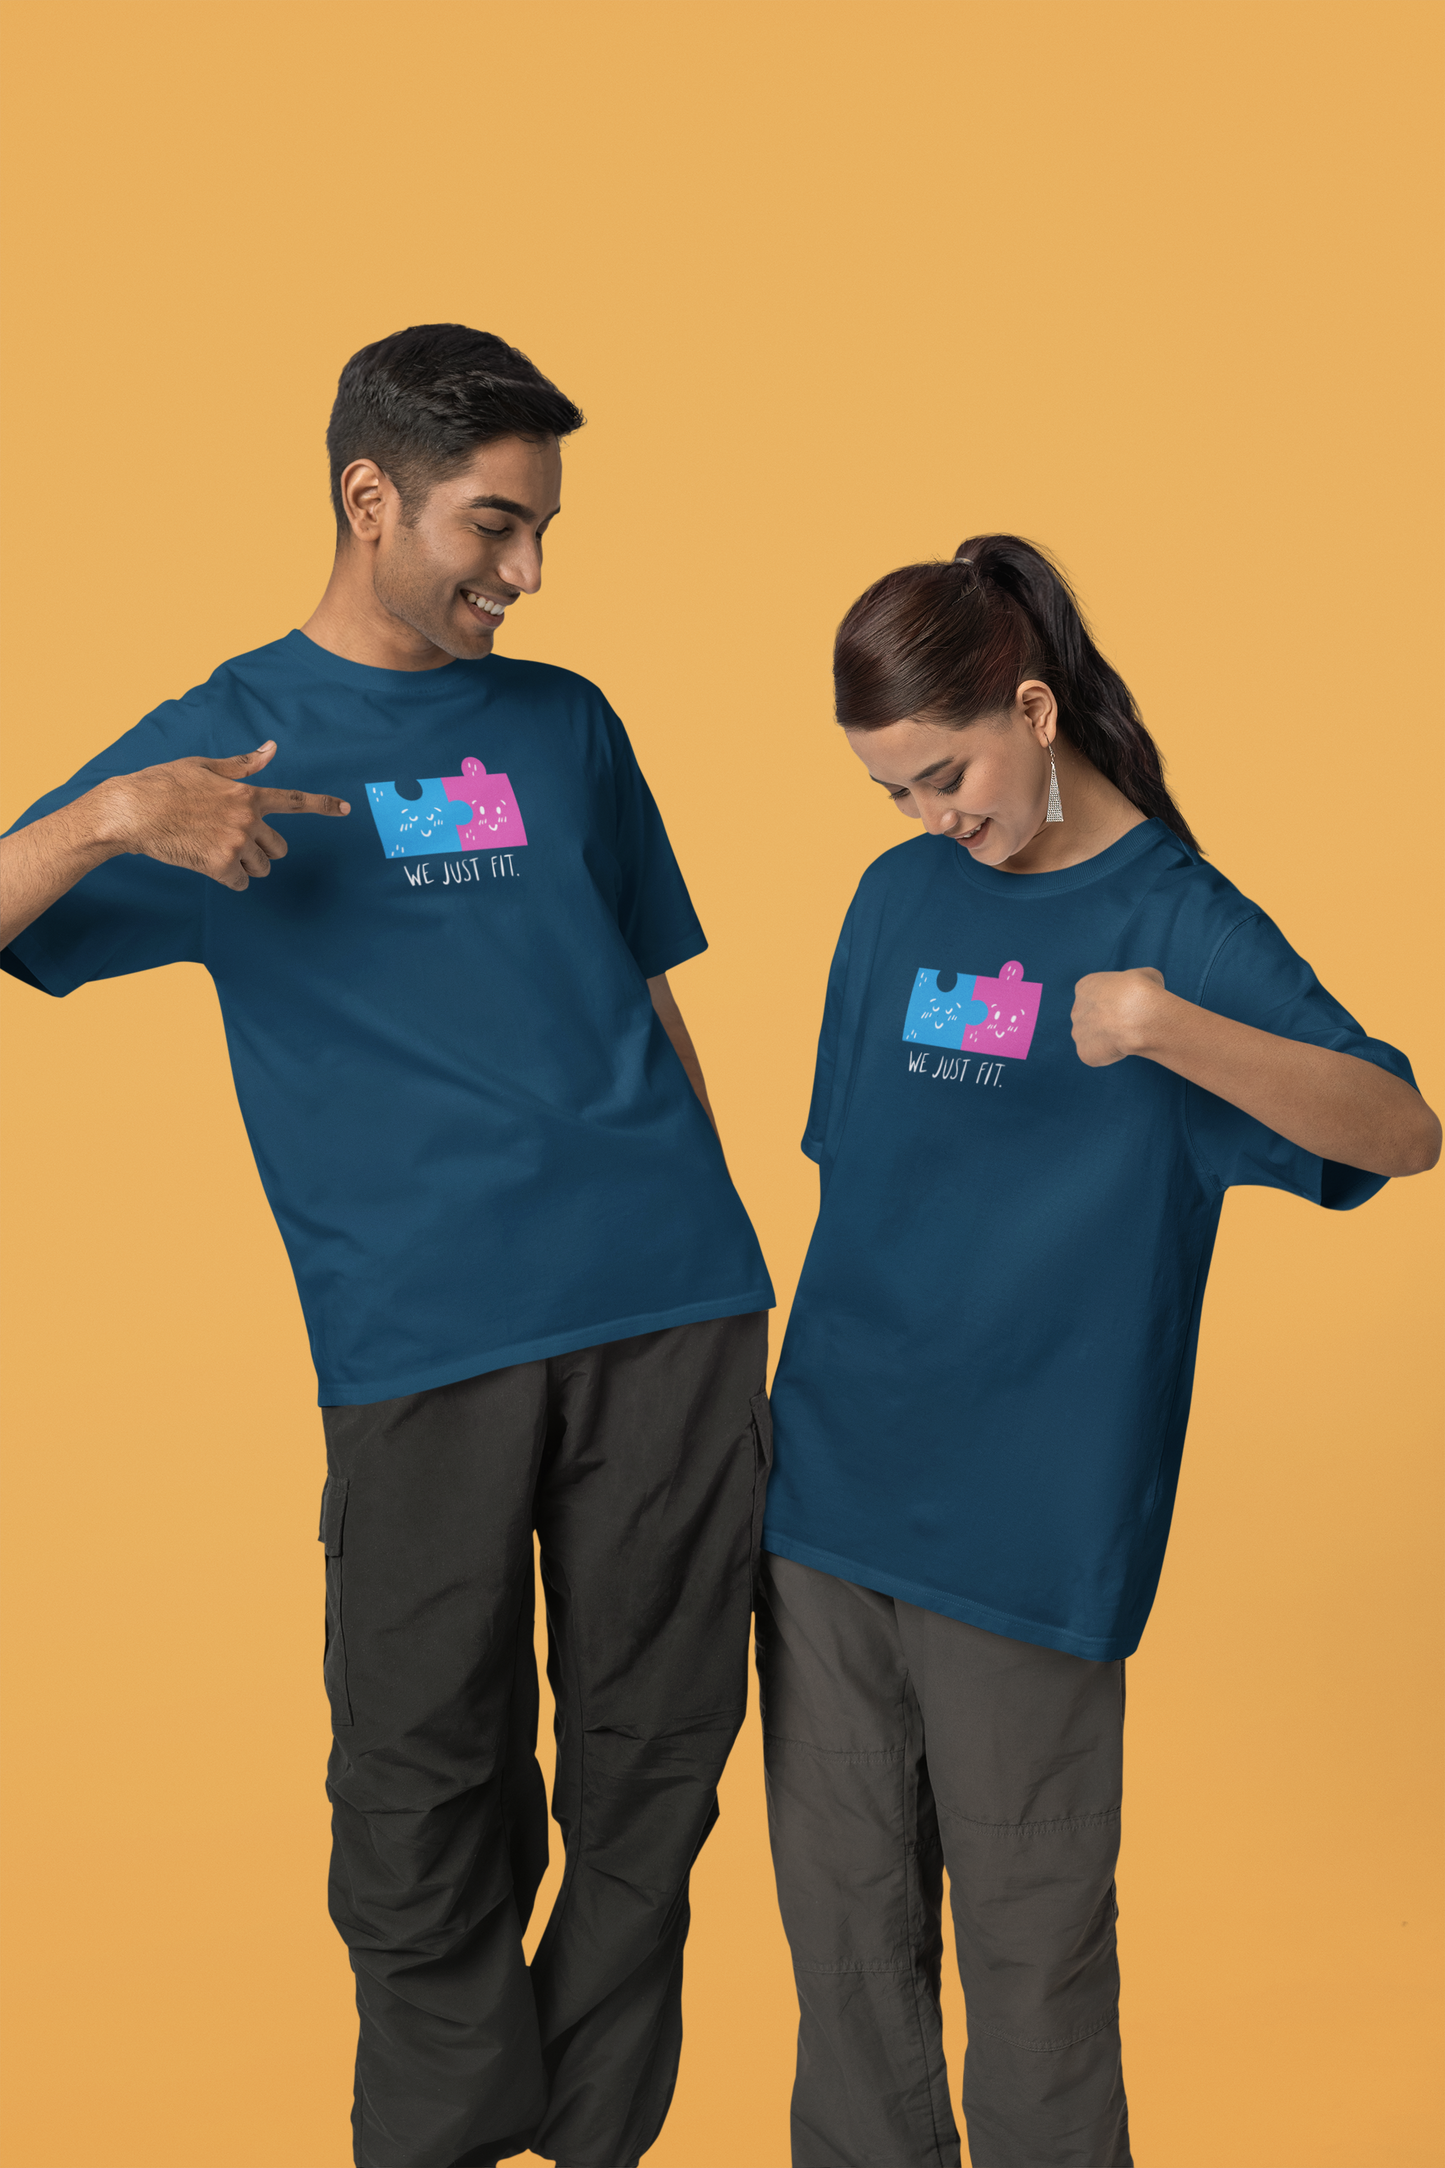 Bilkool We Just Fit Oversized T-Shirt Design for Couples